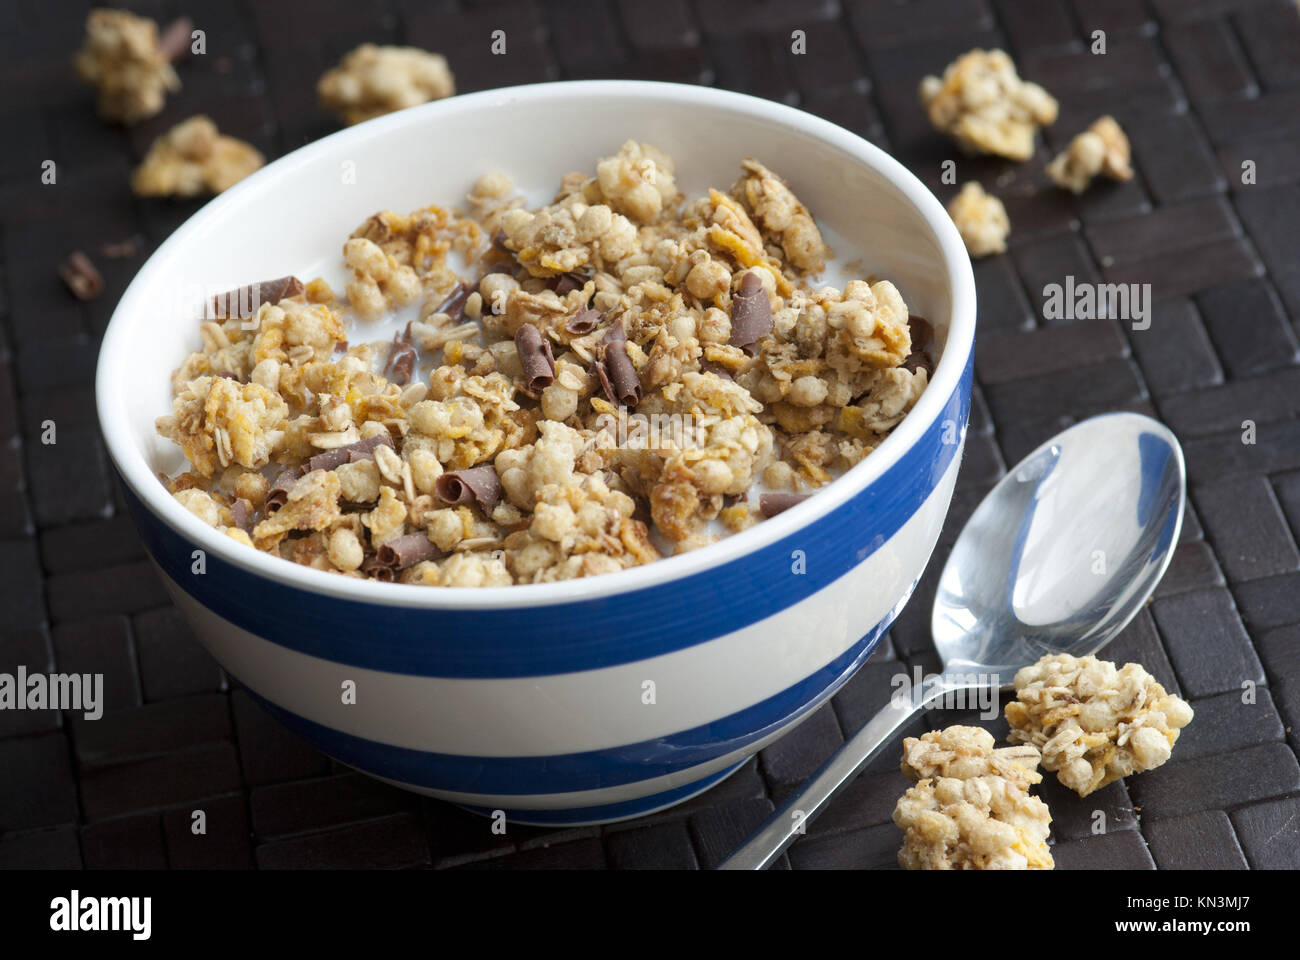 https://c8.alamy.com/comp/KN3MJ7/crunchy-nut-clusters-with-chocolate-chips-in-a-bowl-KN3MJ7.jpg